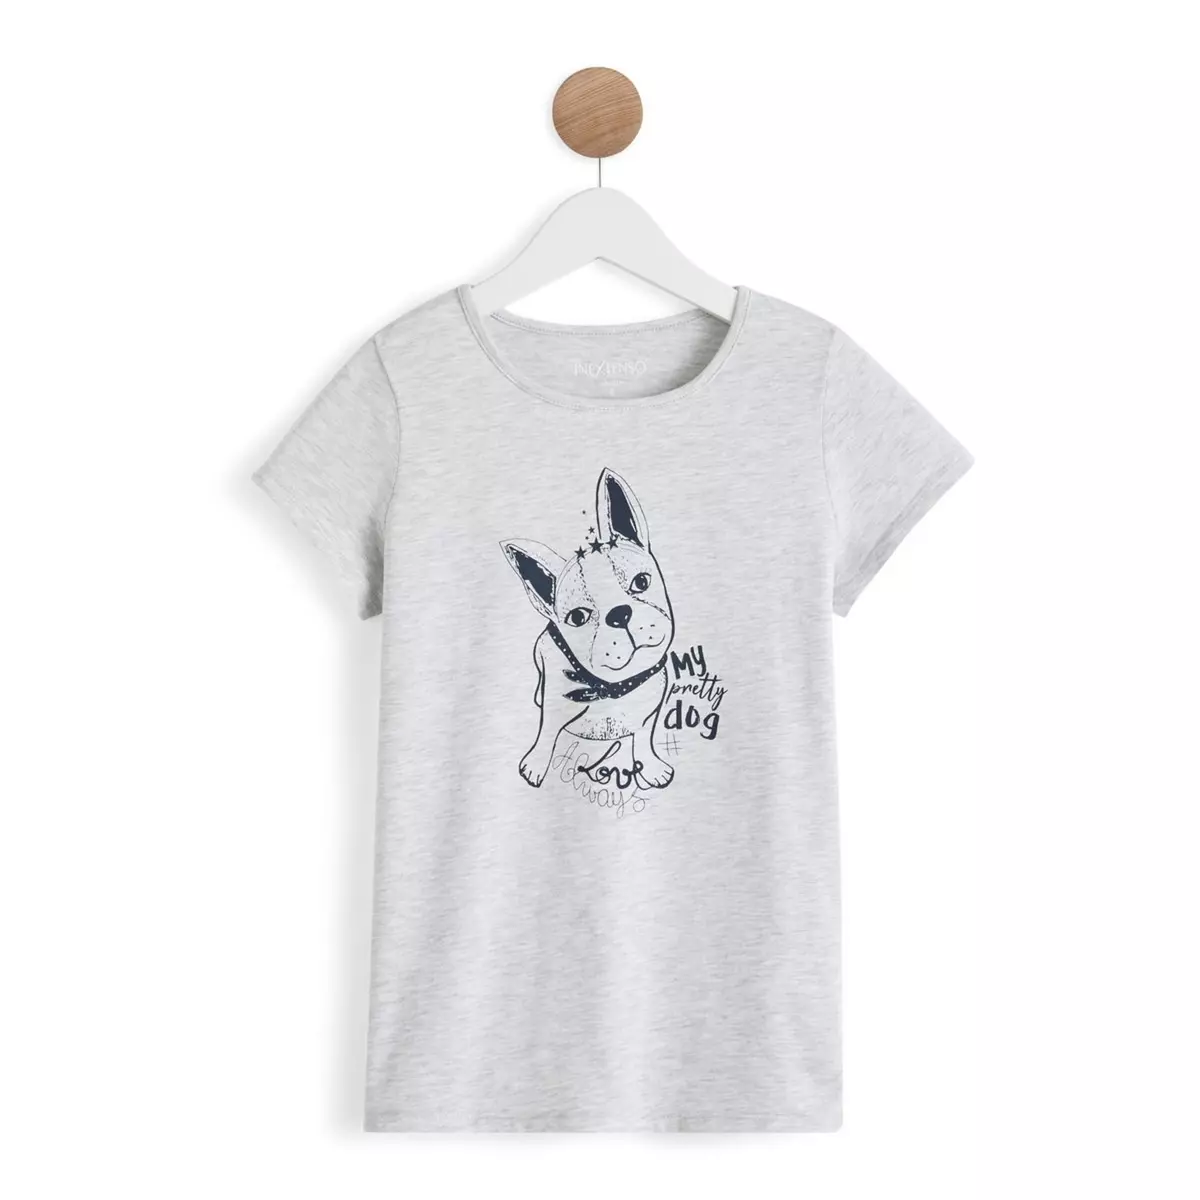 IN EXTENSO T-shirt manches courtes chien fille 